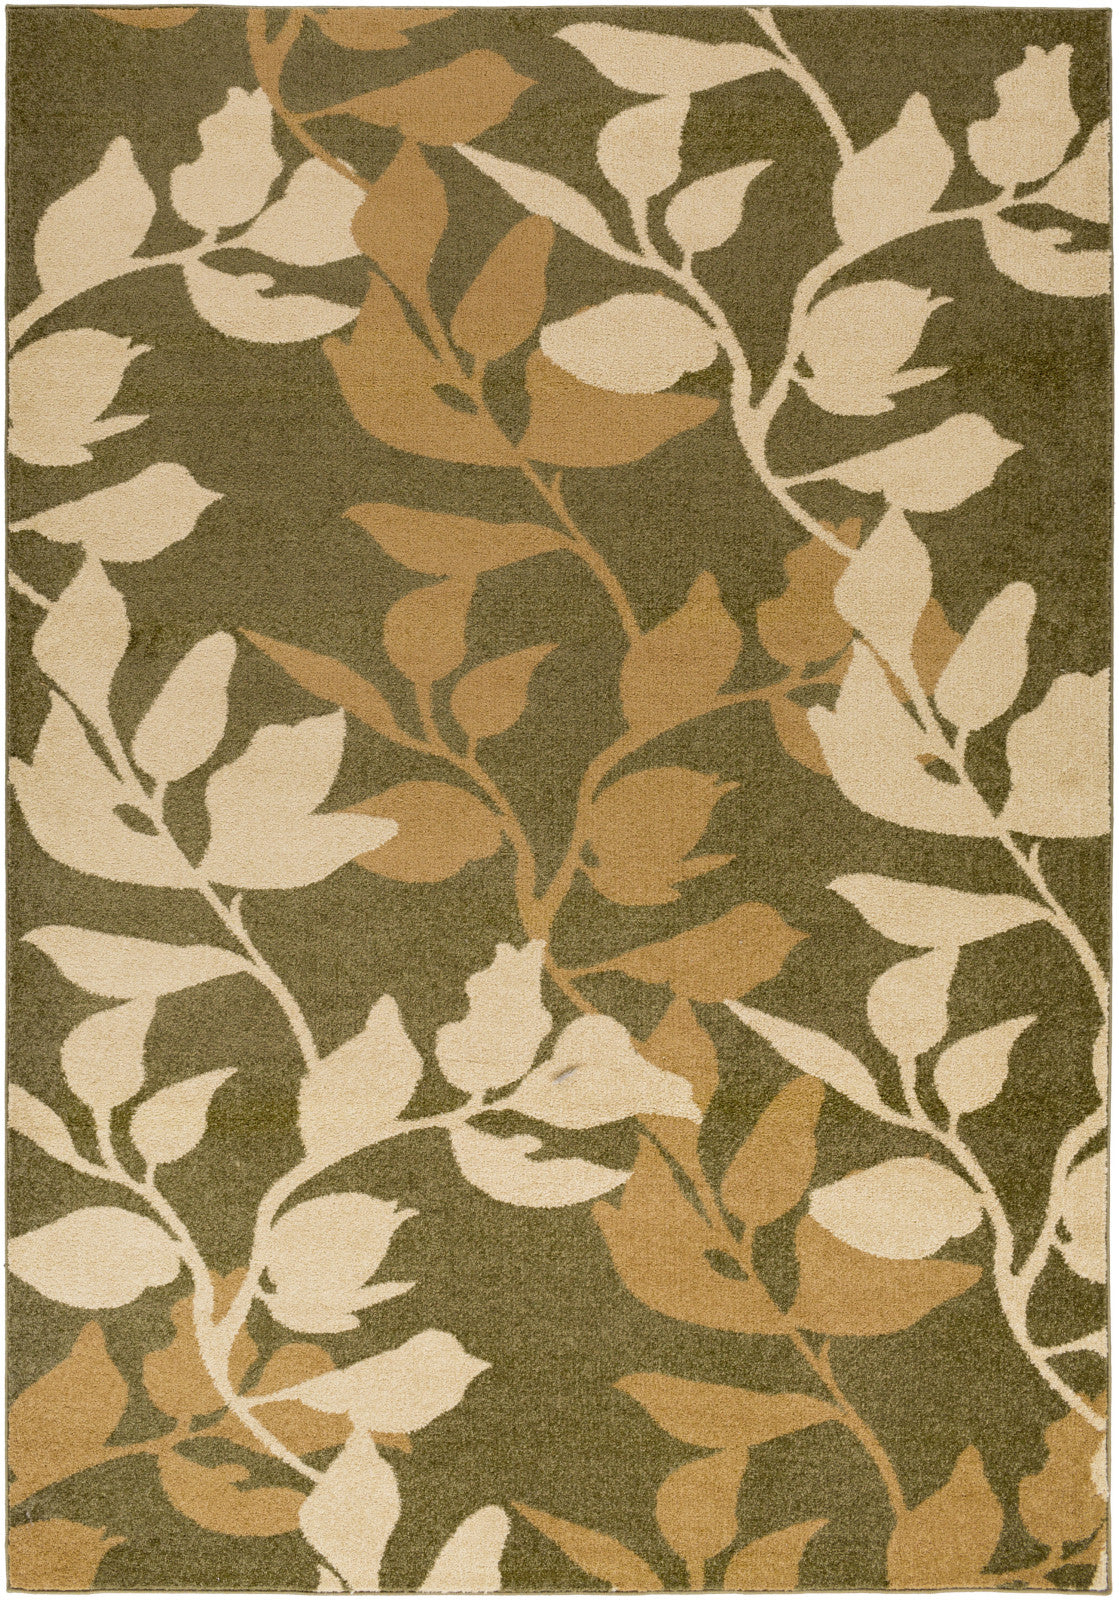 Surya River Home RVH-1008 Green Area Rug by Mossy Oak